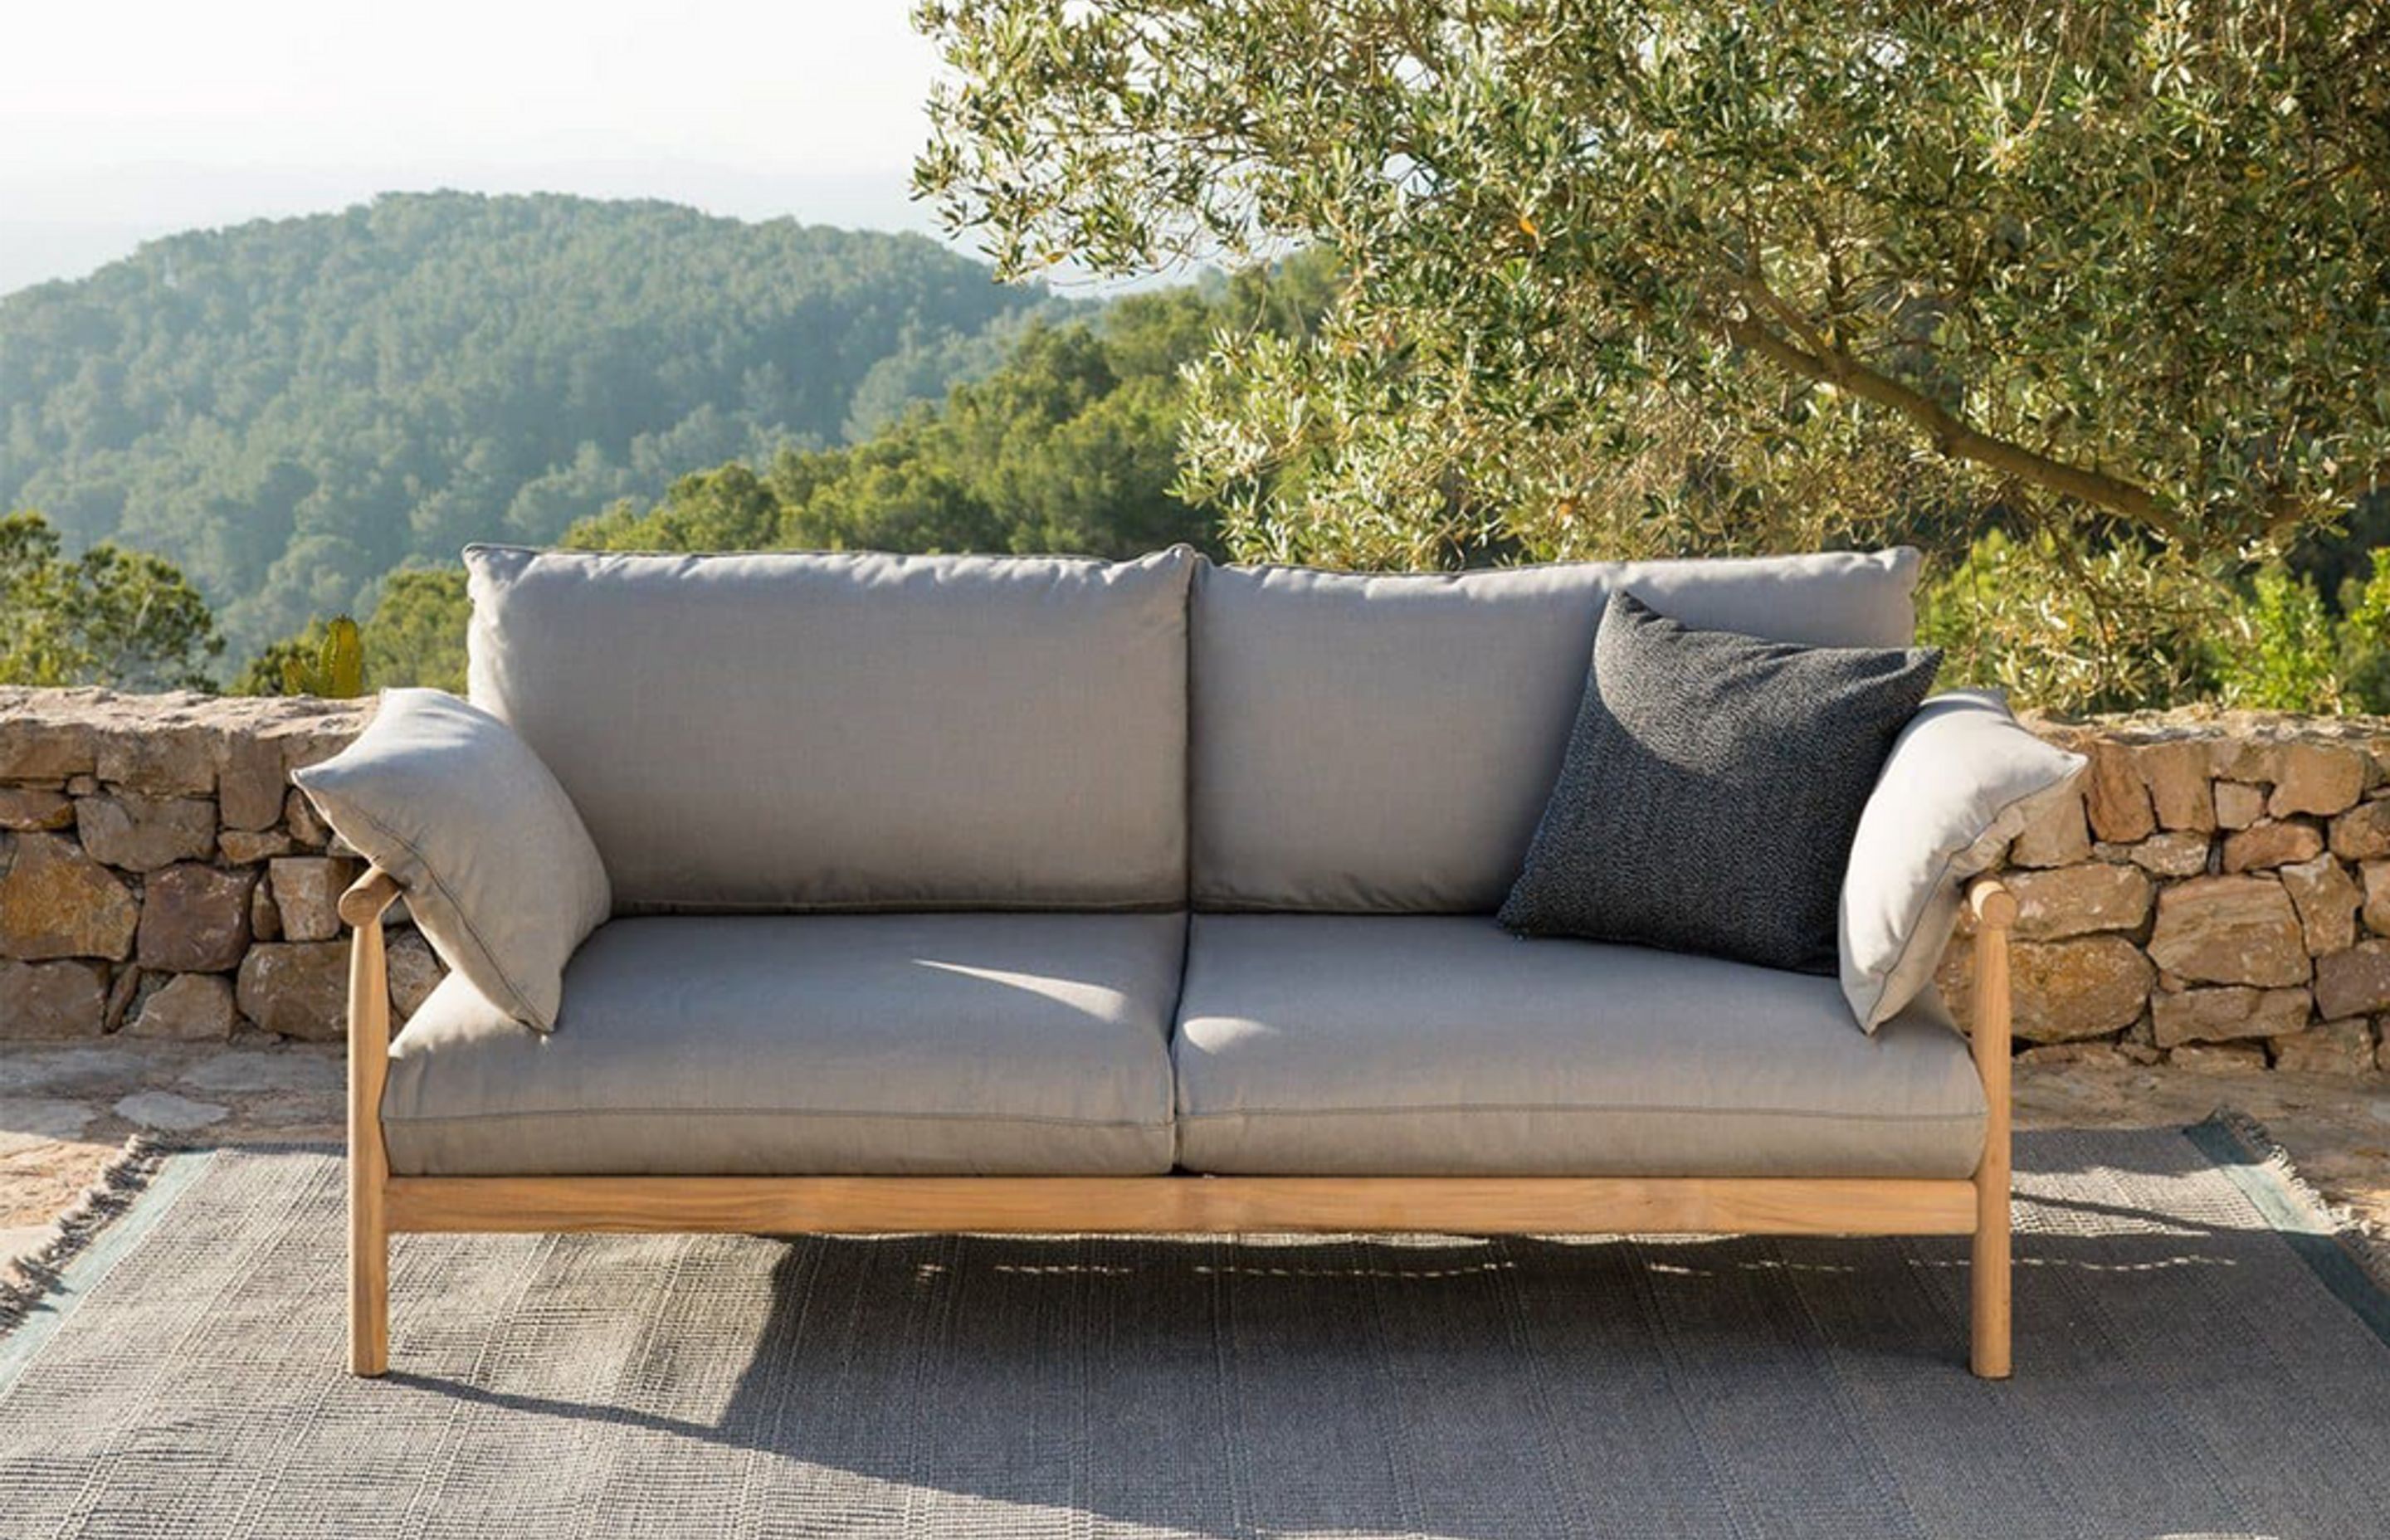 Pictured: Tibbo two-seater Sofa from Dedon.